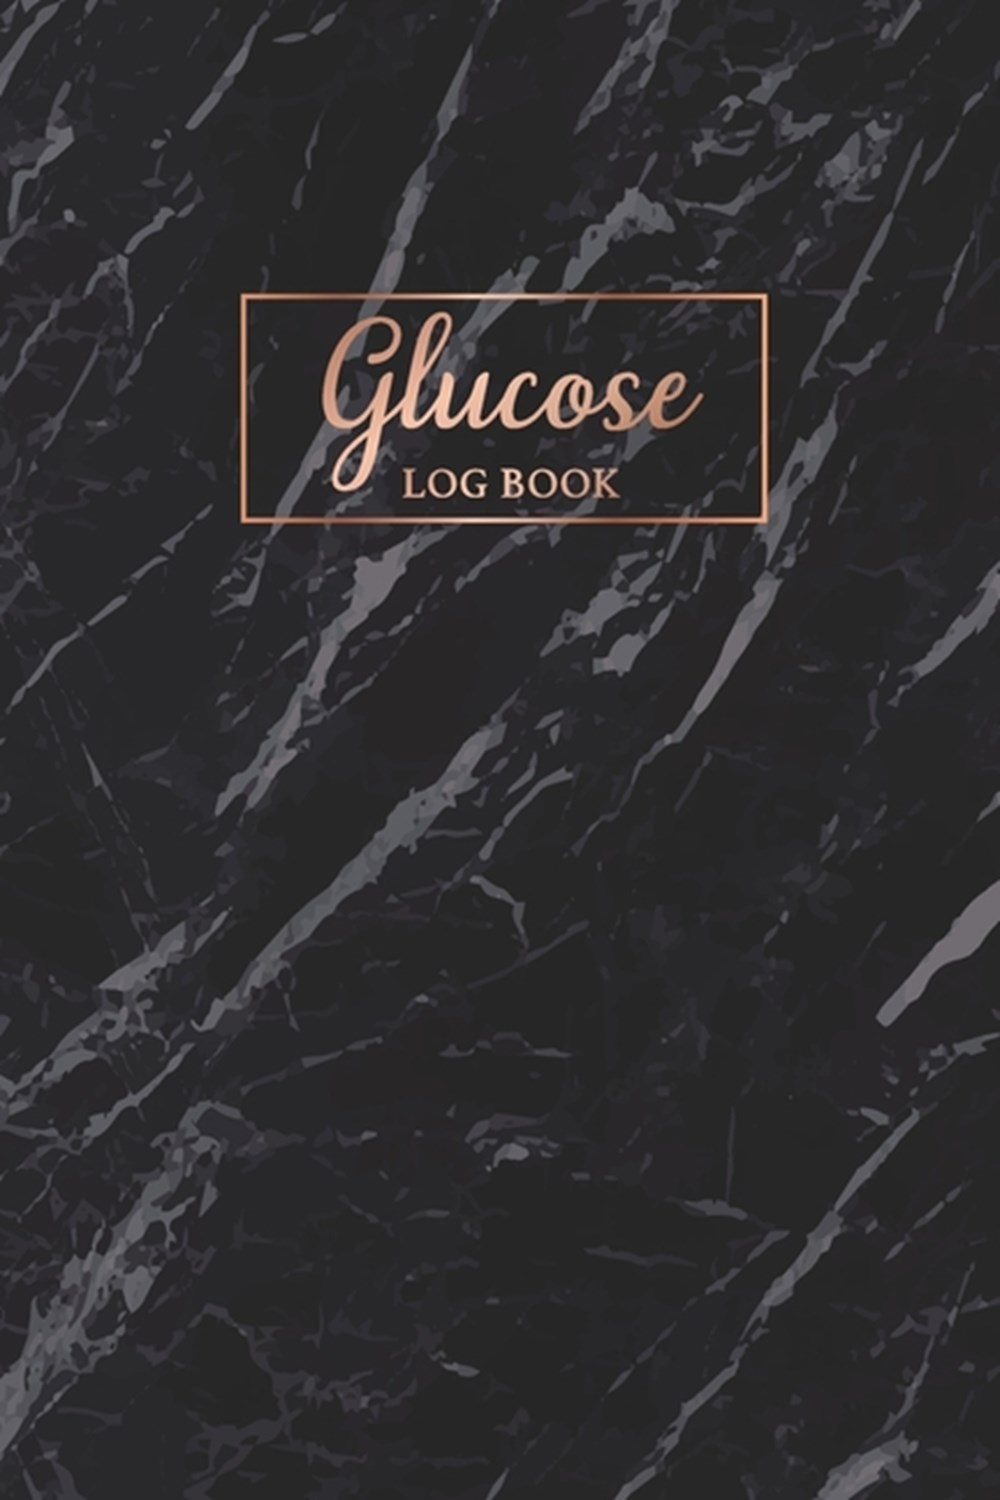 Glucose Log Book Marble Black Cover - 52 Weeks Daily Record Book For Blood Sugar Monitoring - Diabet